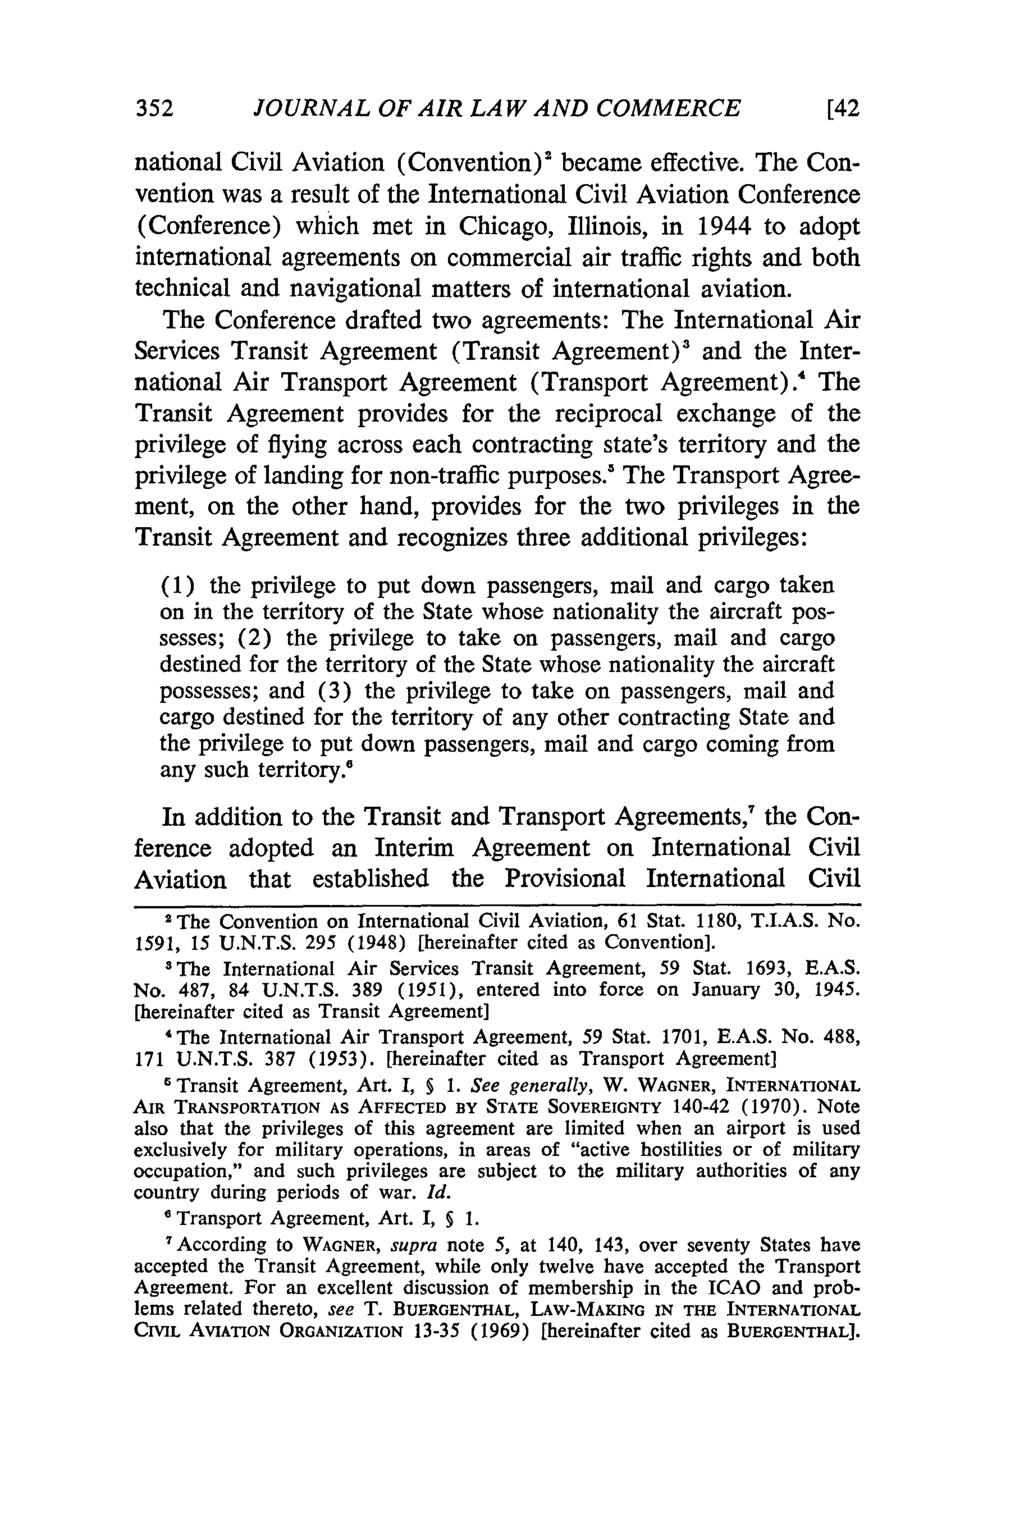 JOURNAL OF AIR LAW AND COMMERCE national Civil Aviation (Convention)' became effective.